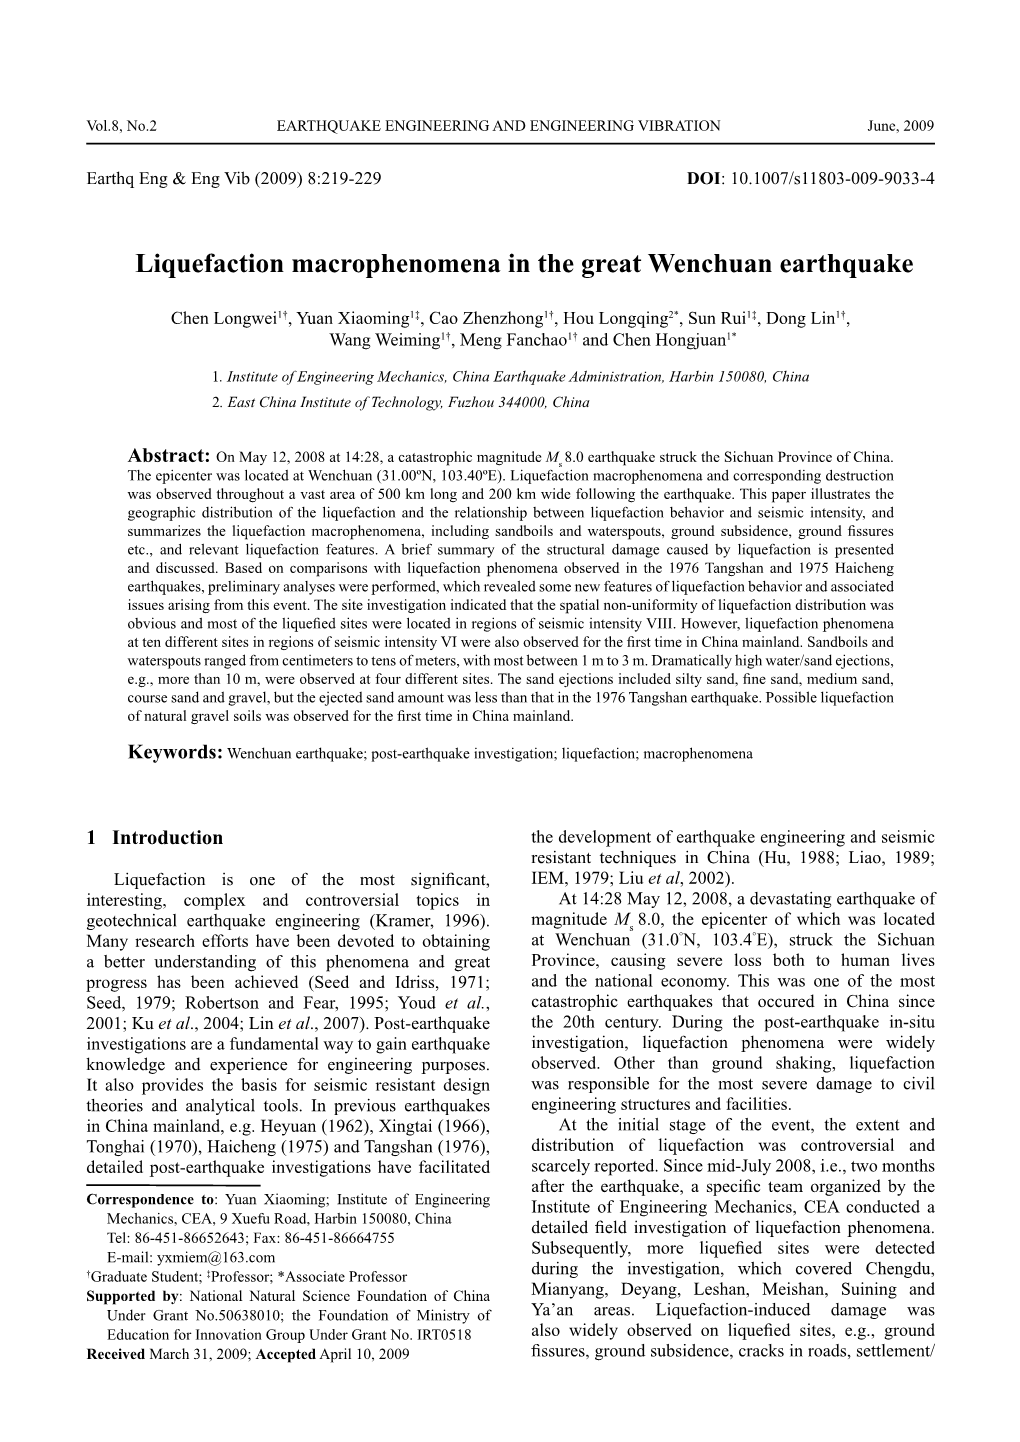 Liquefaction Macrophenomena in the Great Wenchuan Earthquake